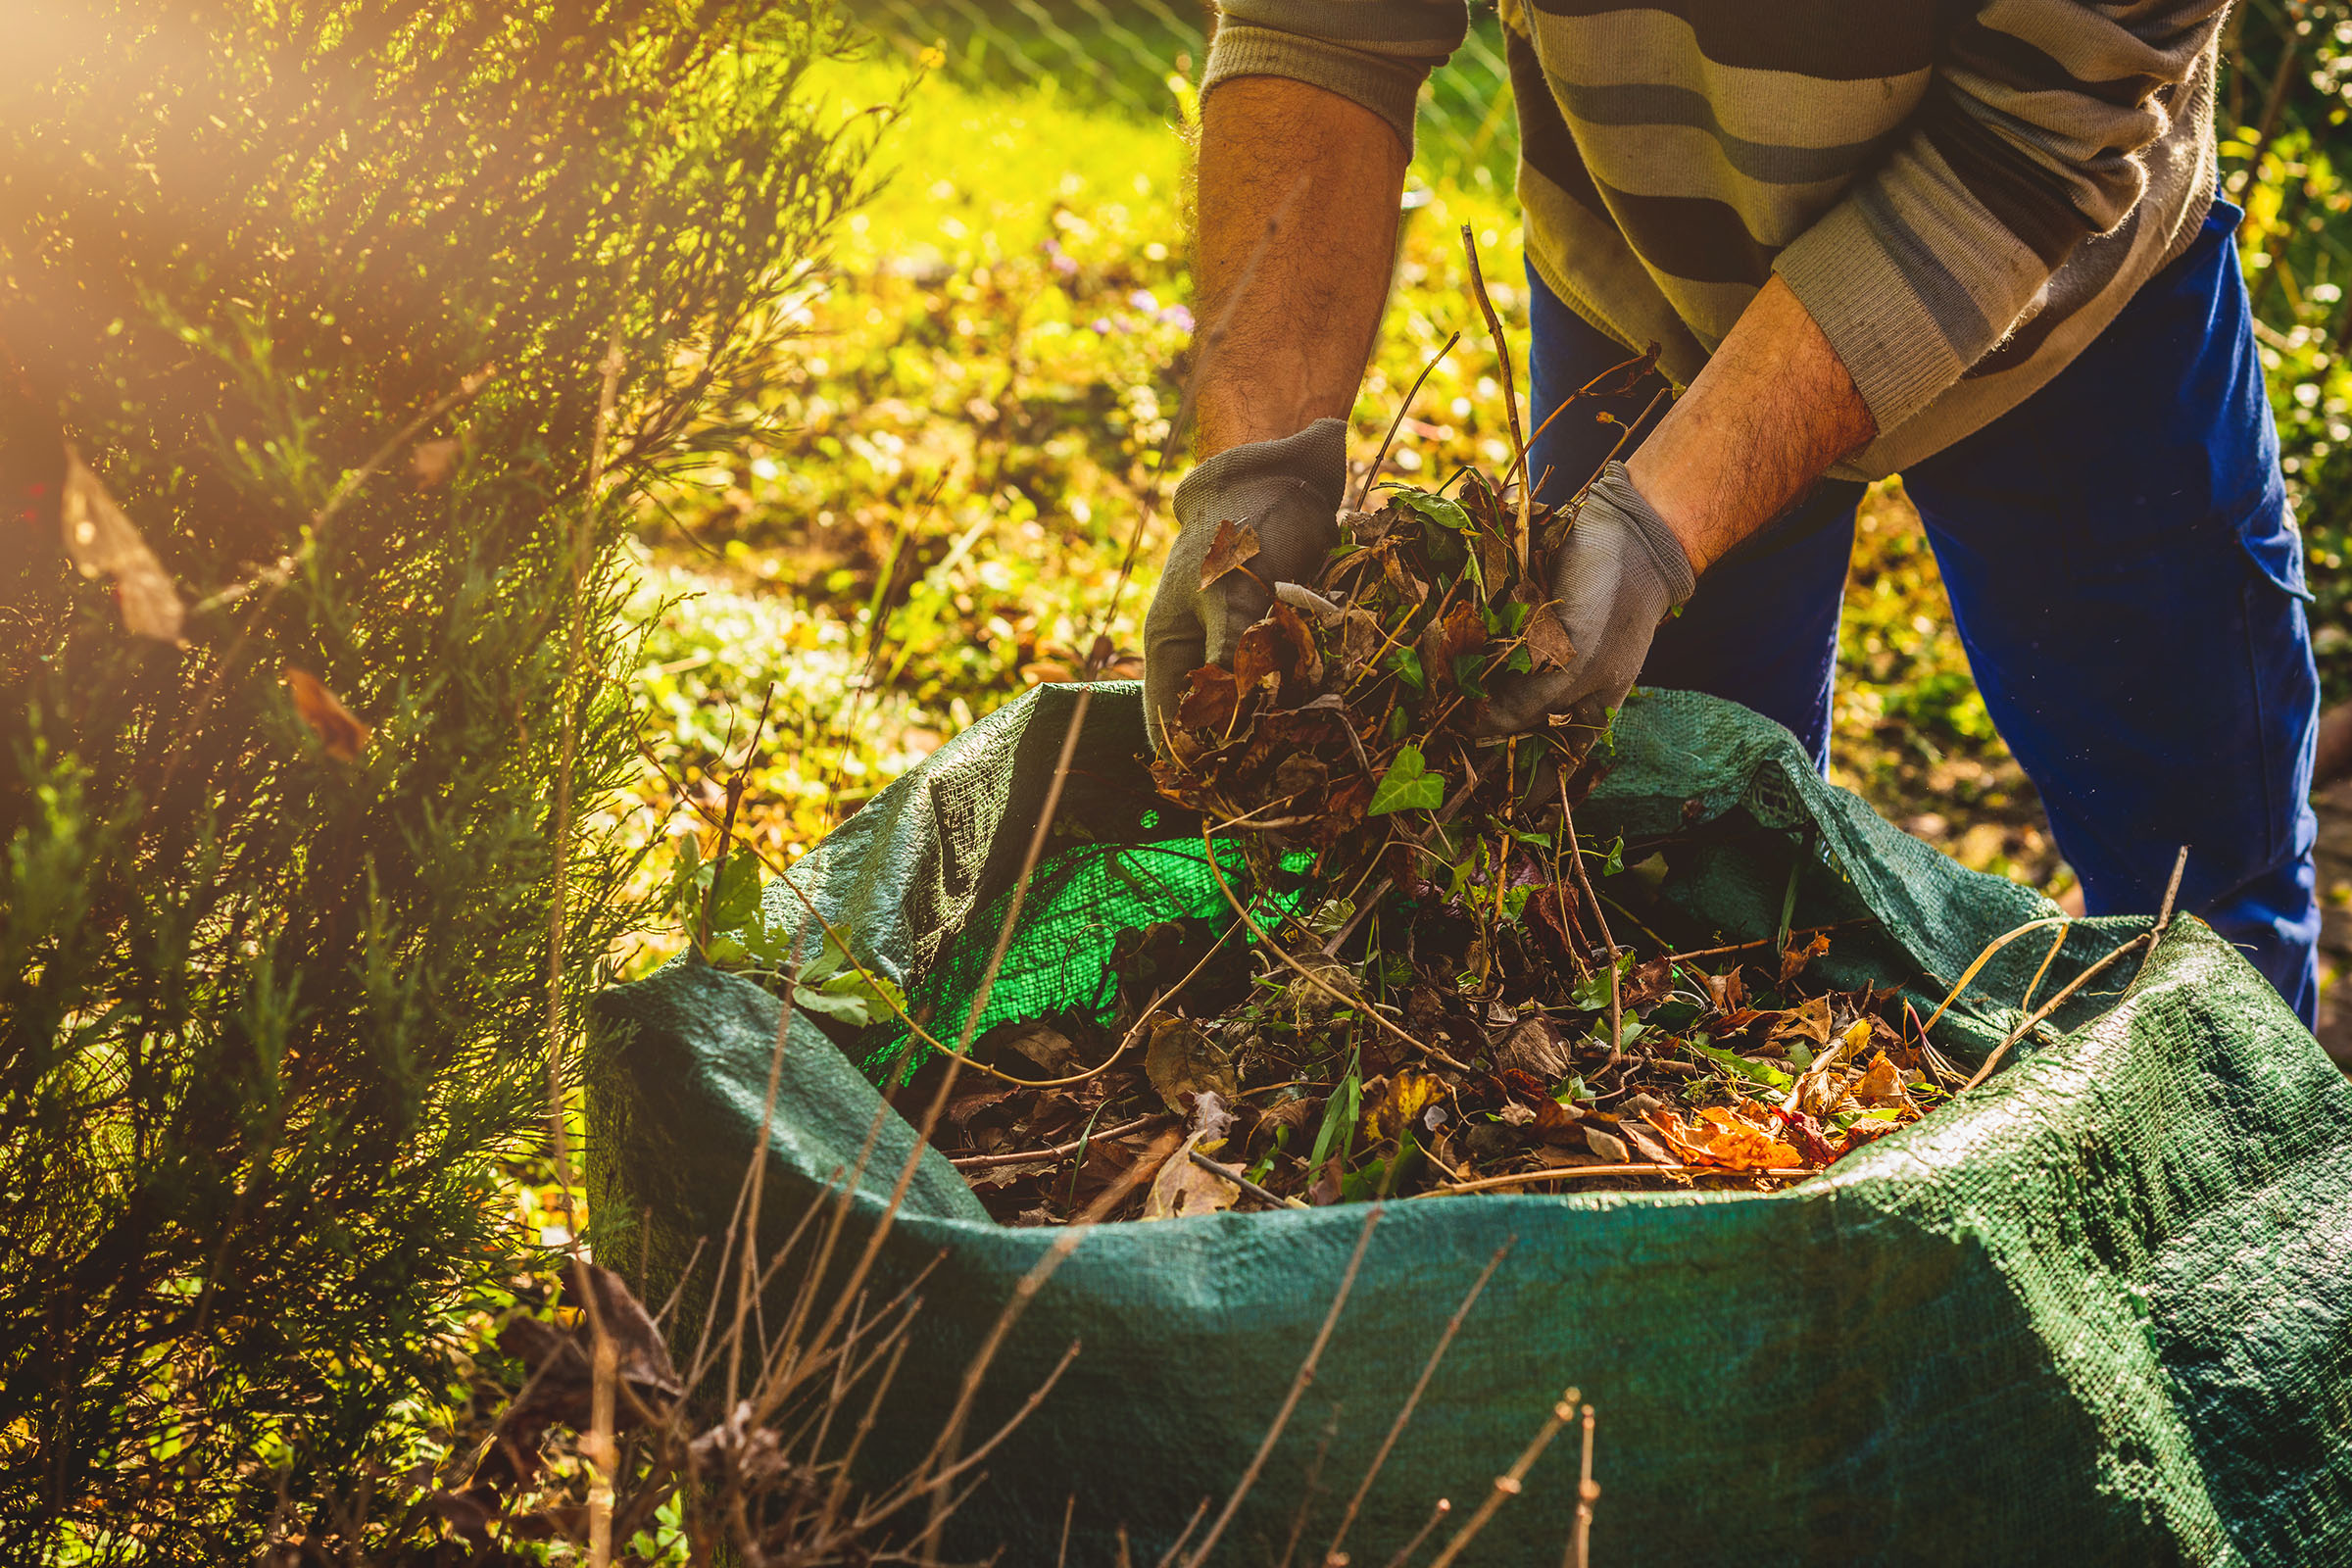 Cleaning up the garden in the fall gives gardeners a head start in the spring. (Photo by Shutterstock.)